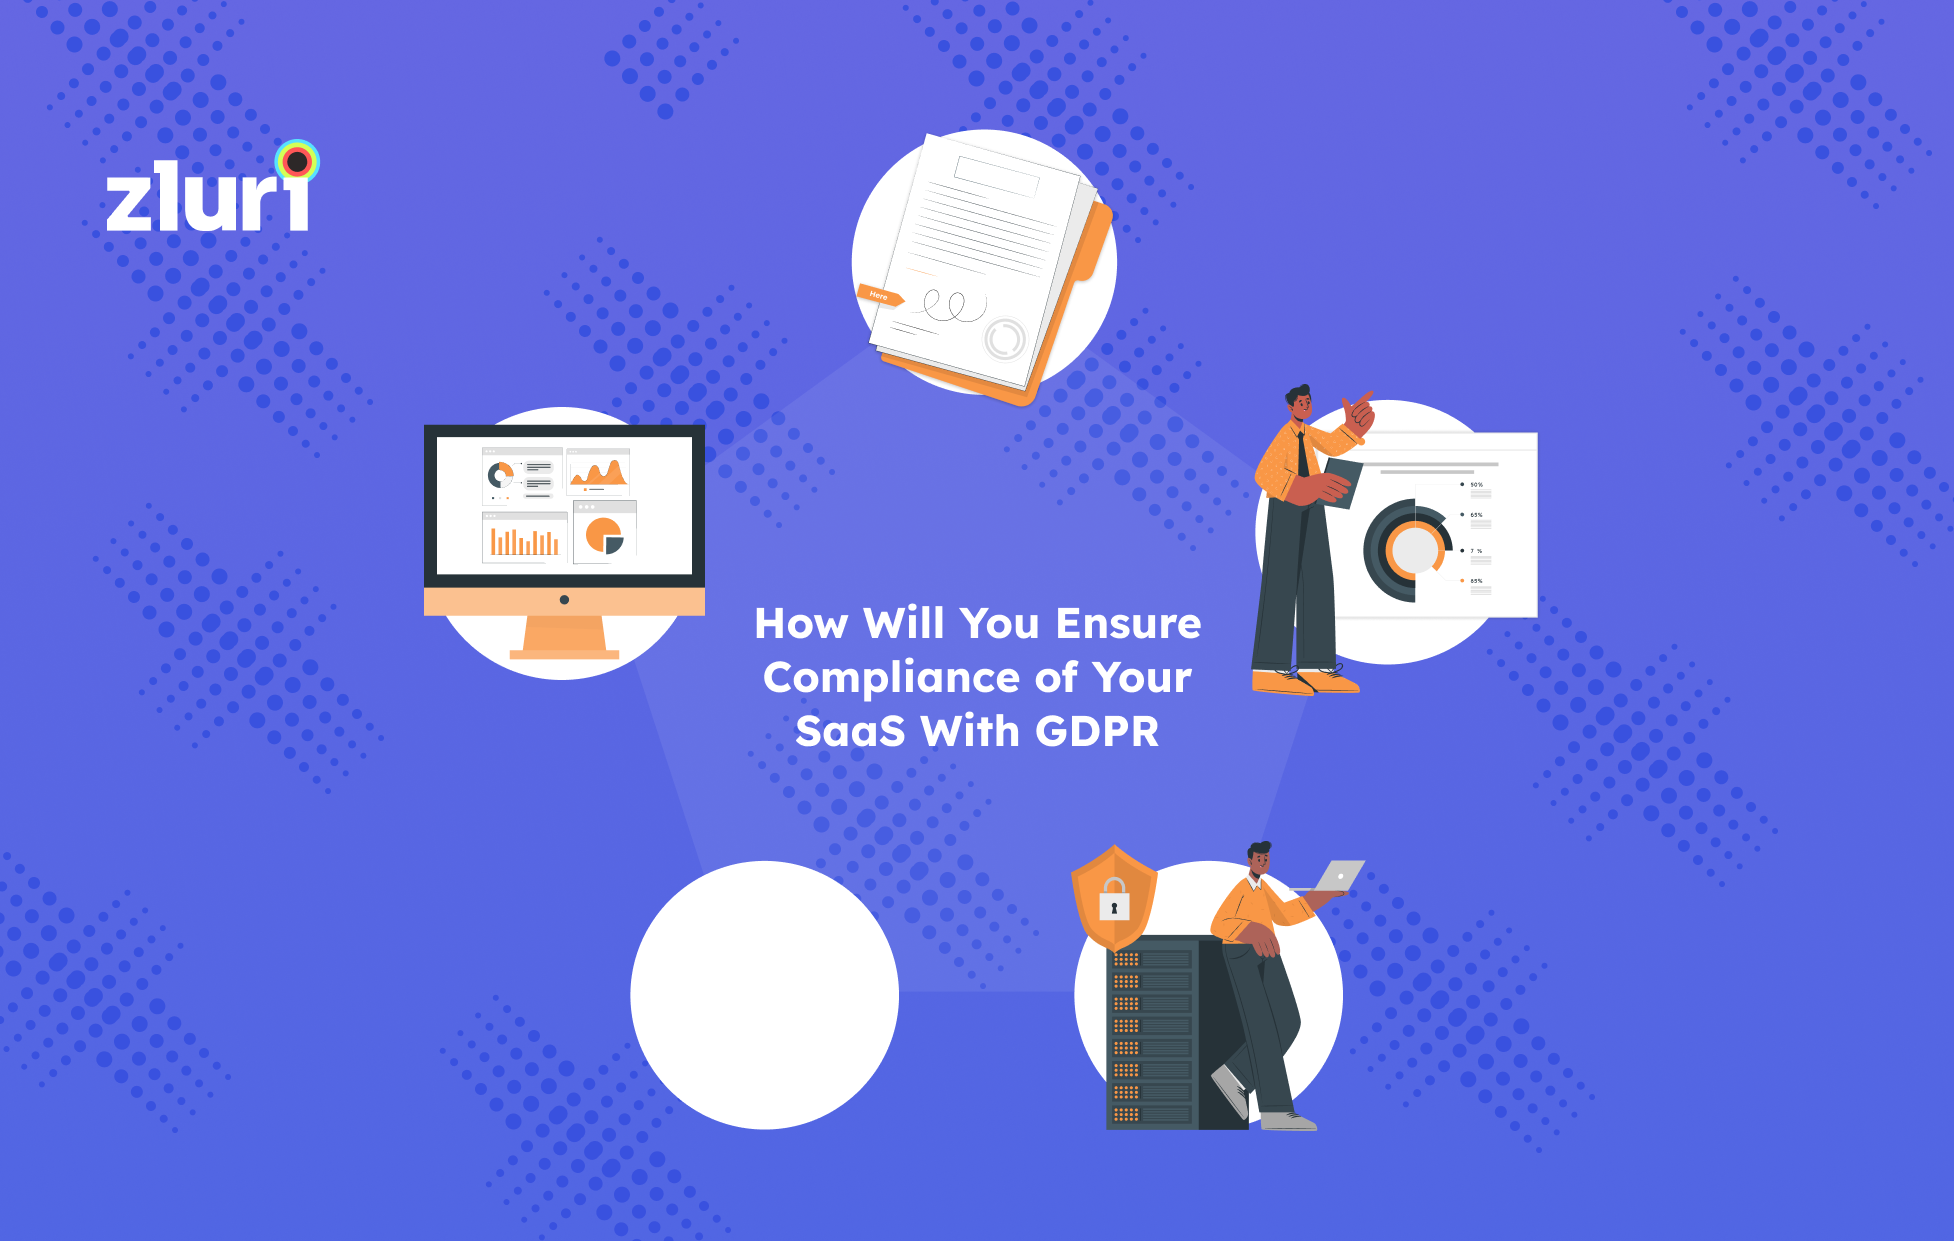 How Will You Ensure Compliance of Your SaaS With GDPR